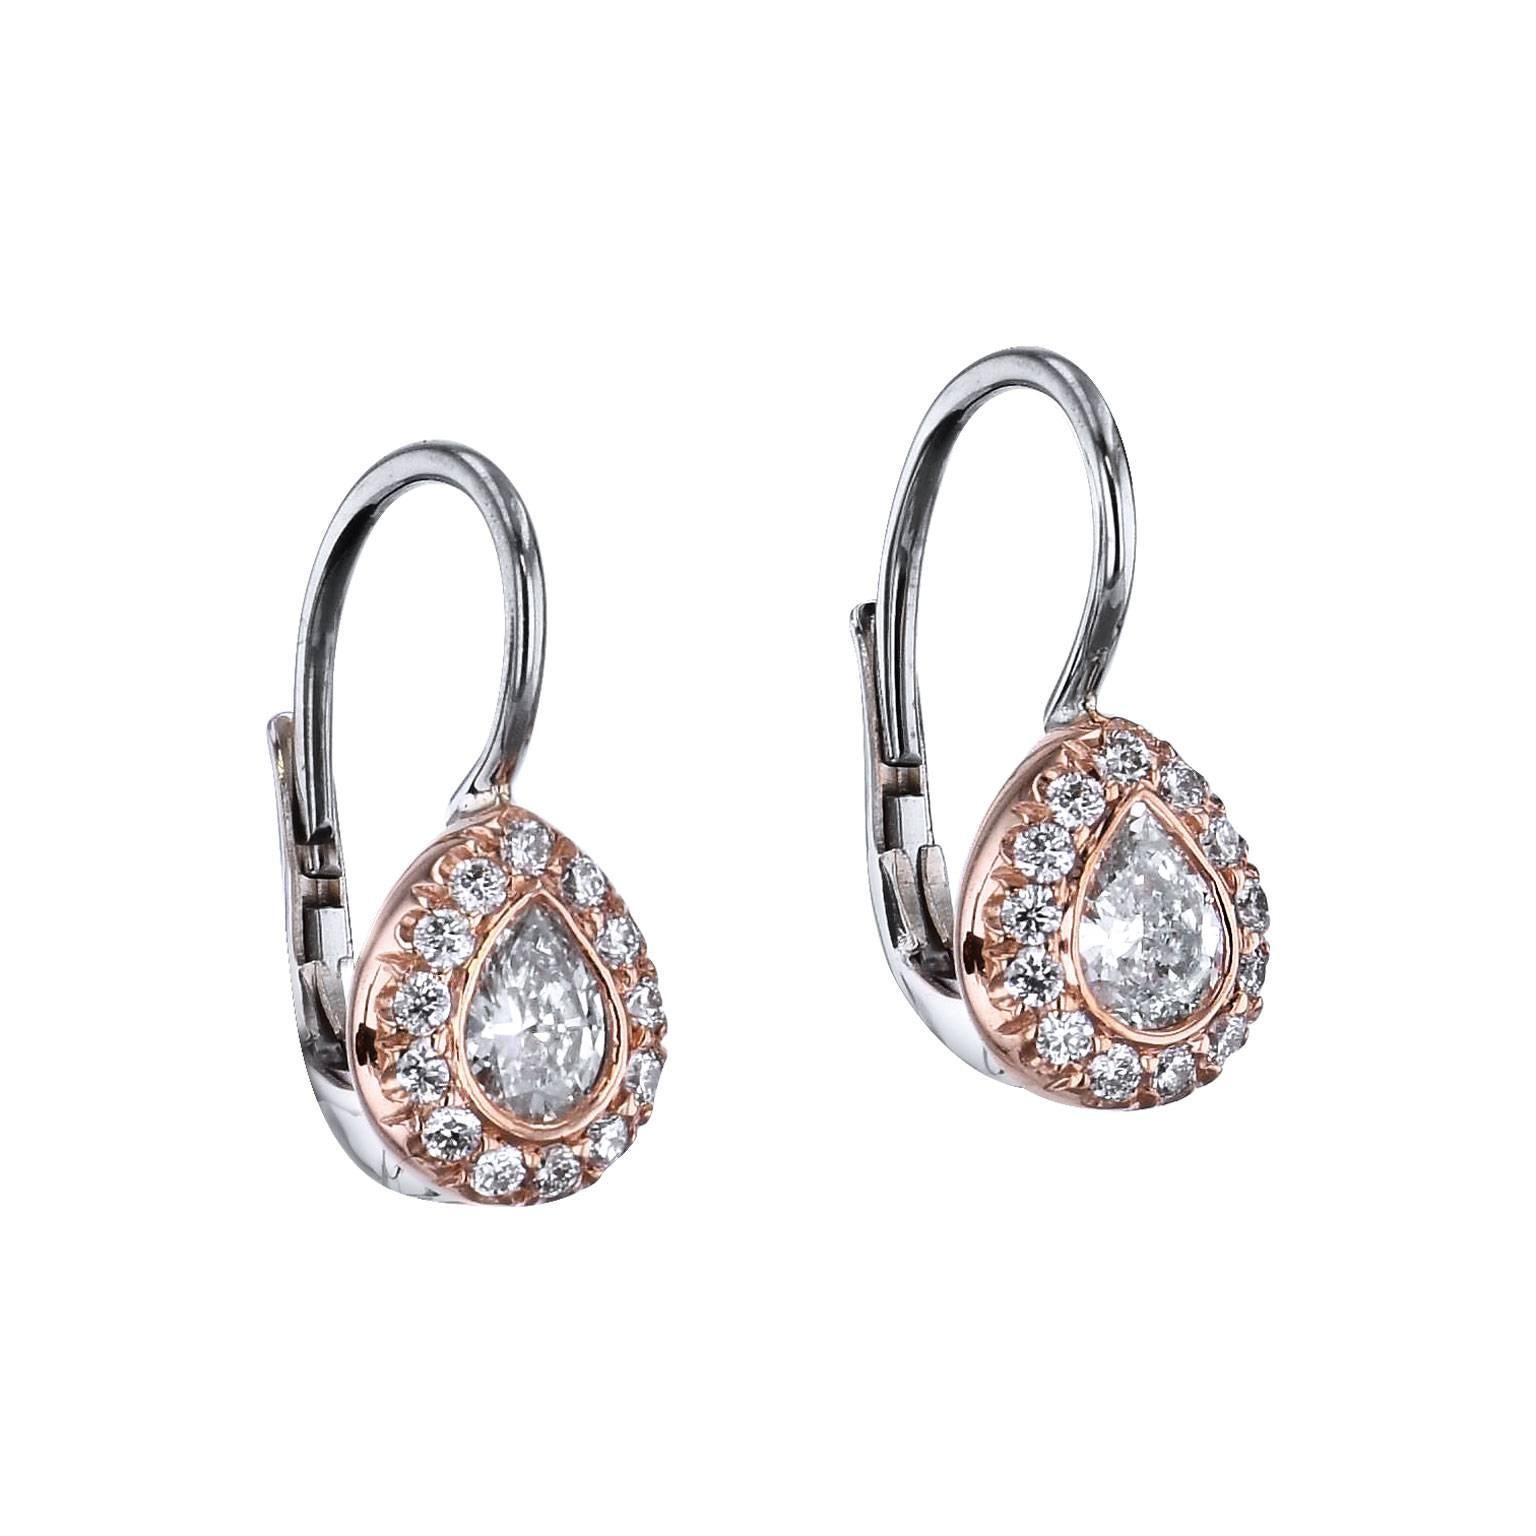 0.31 Carat Pear-Shaped Diamond Lever-Back Earrings 18 karat White and Rose Gold 

These are one of a kind and handmade by H&H Jewels.  

Two pear-shaped diamonds, with a total weight of 0.31 carat (F/G/VS2) hang with poise; while twenty-six pave-set